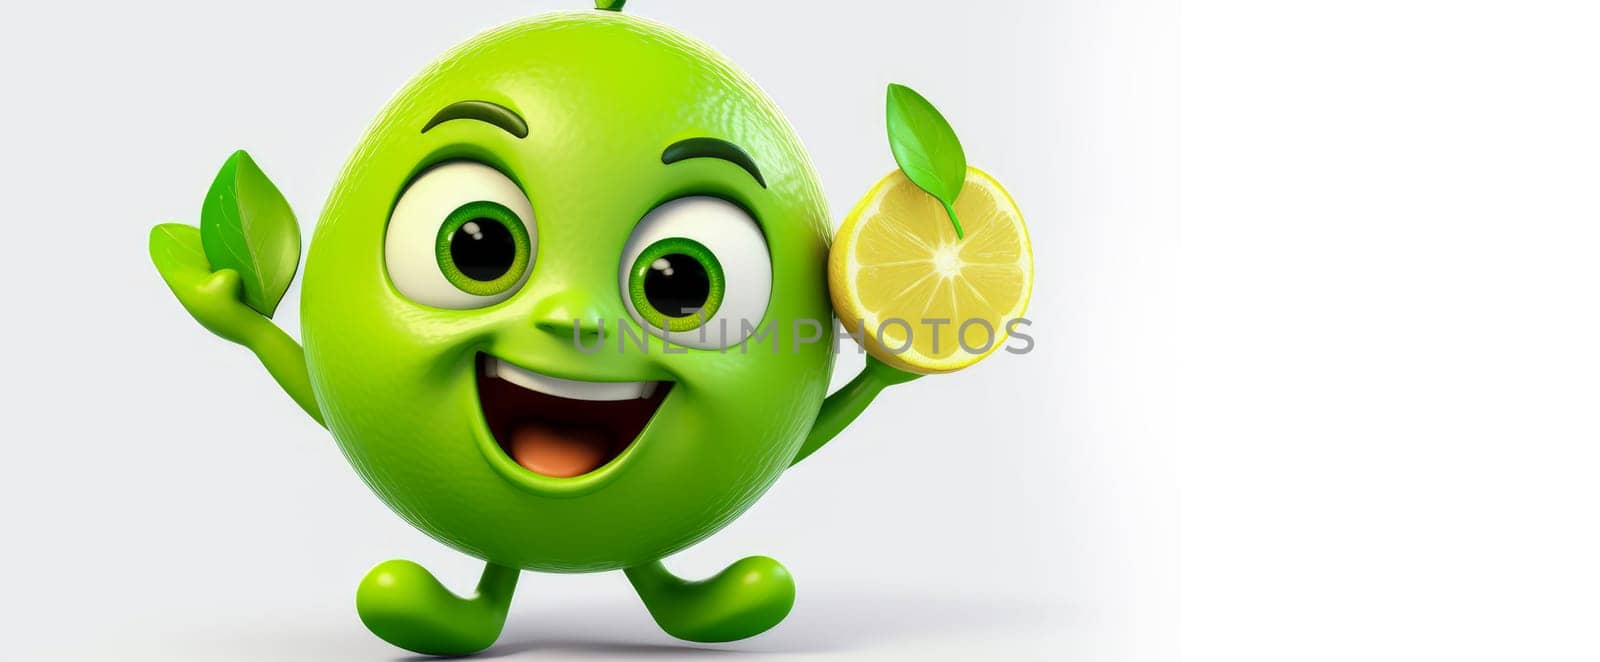 Green lime with a cheerful face 3D on a white background. Cartoon characters, three-dimensional character, healthy lifestyle, proper nutrition, diet, fresh vegetables and fruits, vegetarianism, veganism, food, breakfast, fun, laughter, banner